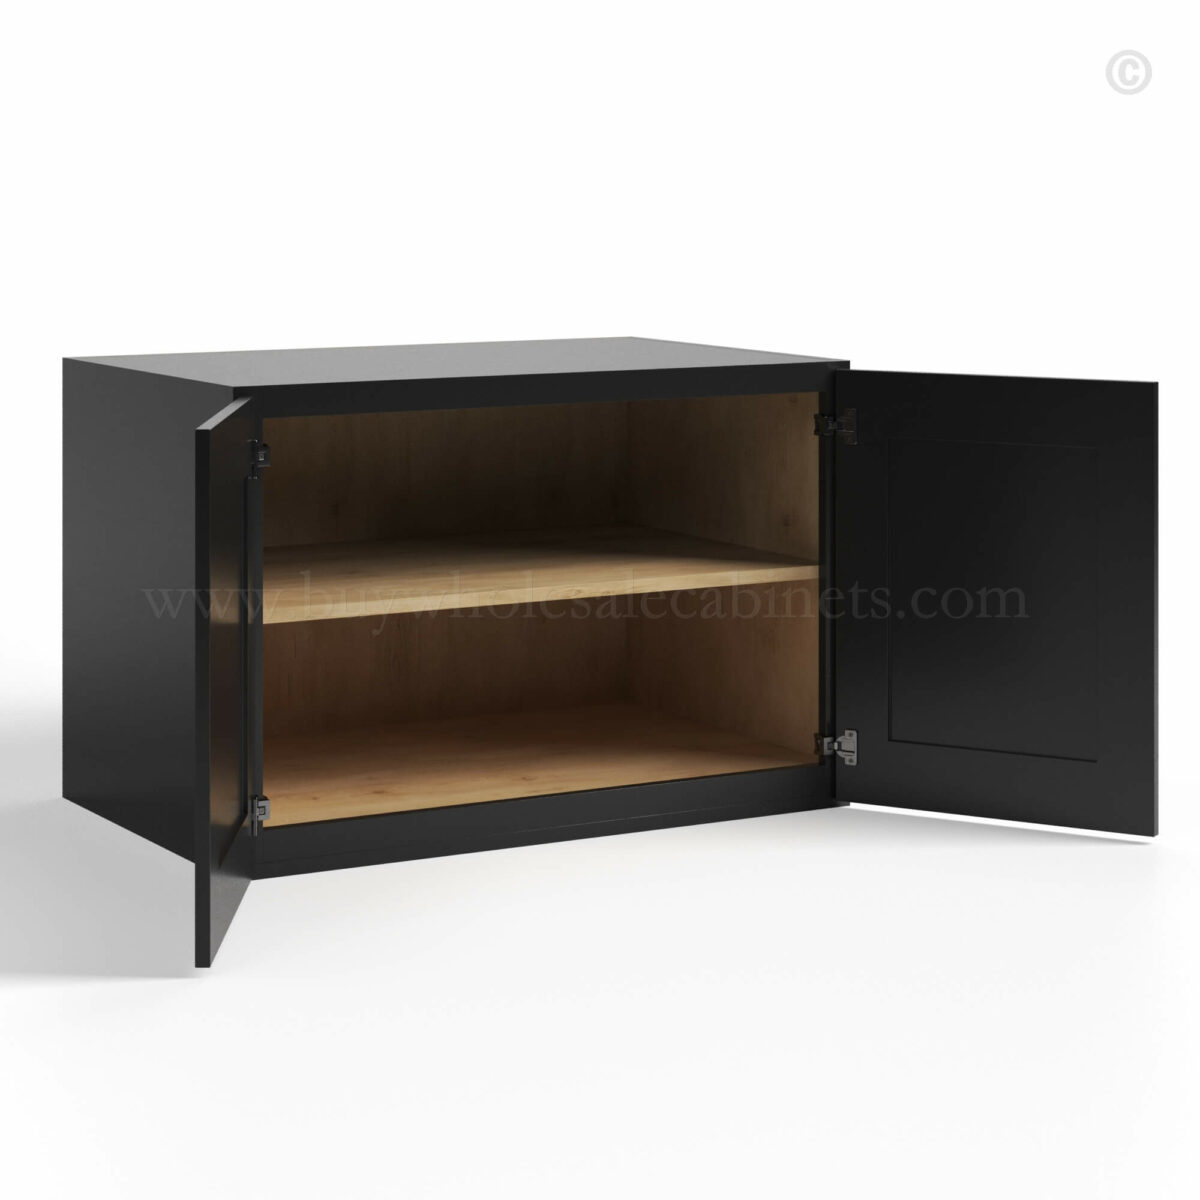 Black Shaker Double Door Wall Cabinet, rta cabinets, wholesale cabinets